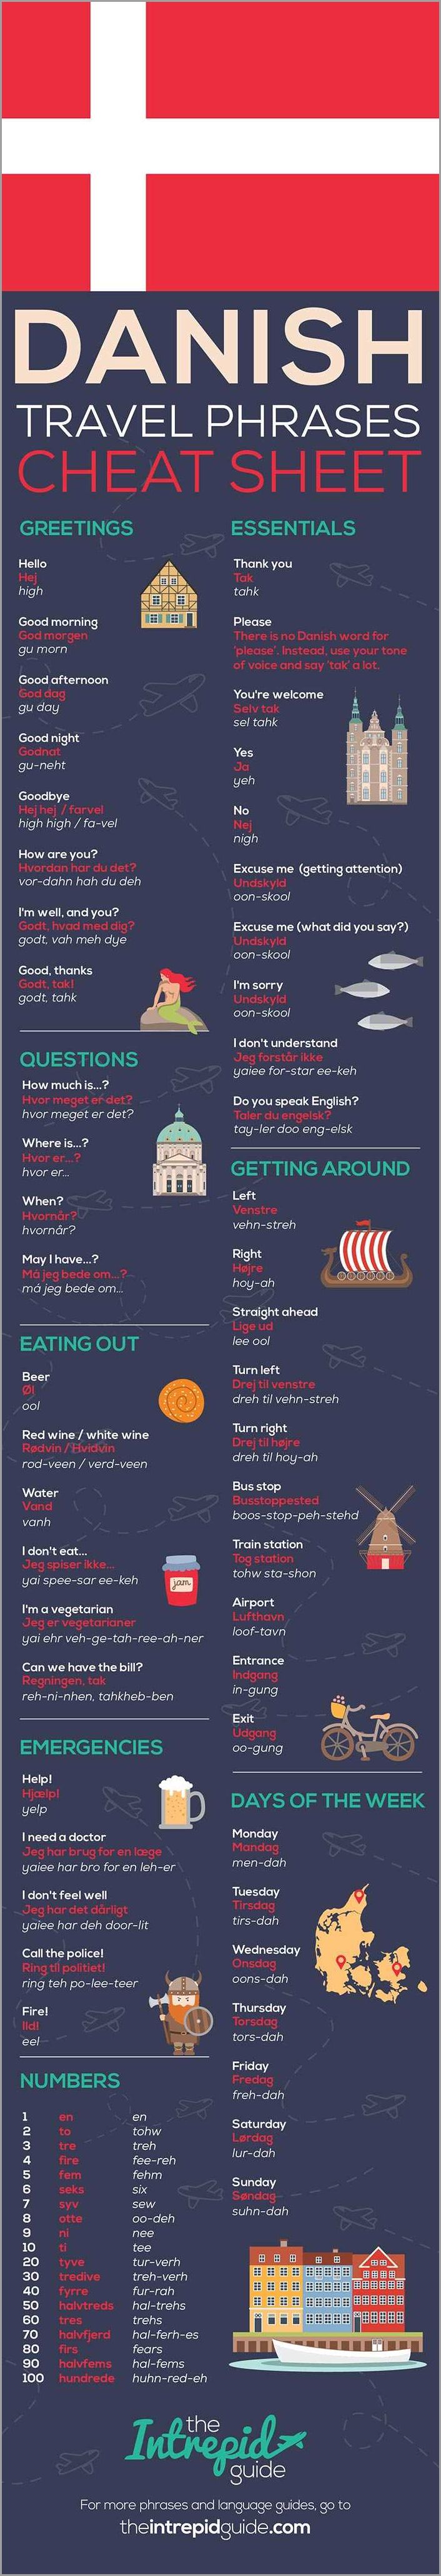 How to Say Hello in Danish A Simple Guide for Beginners